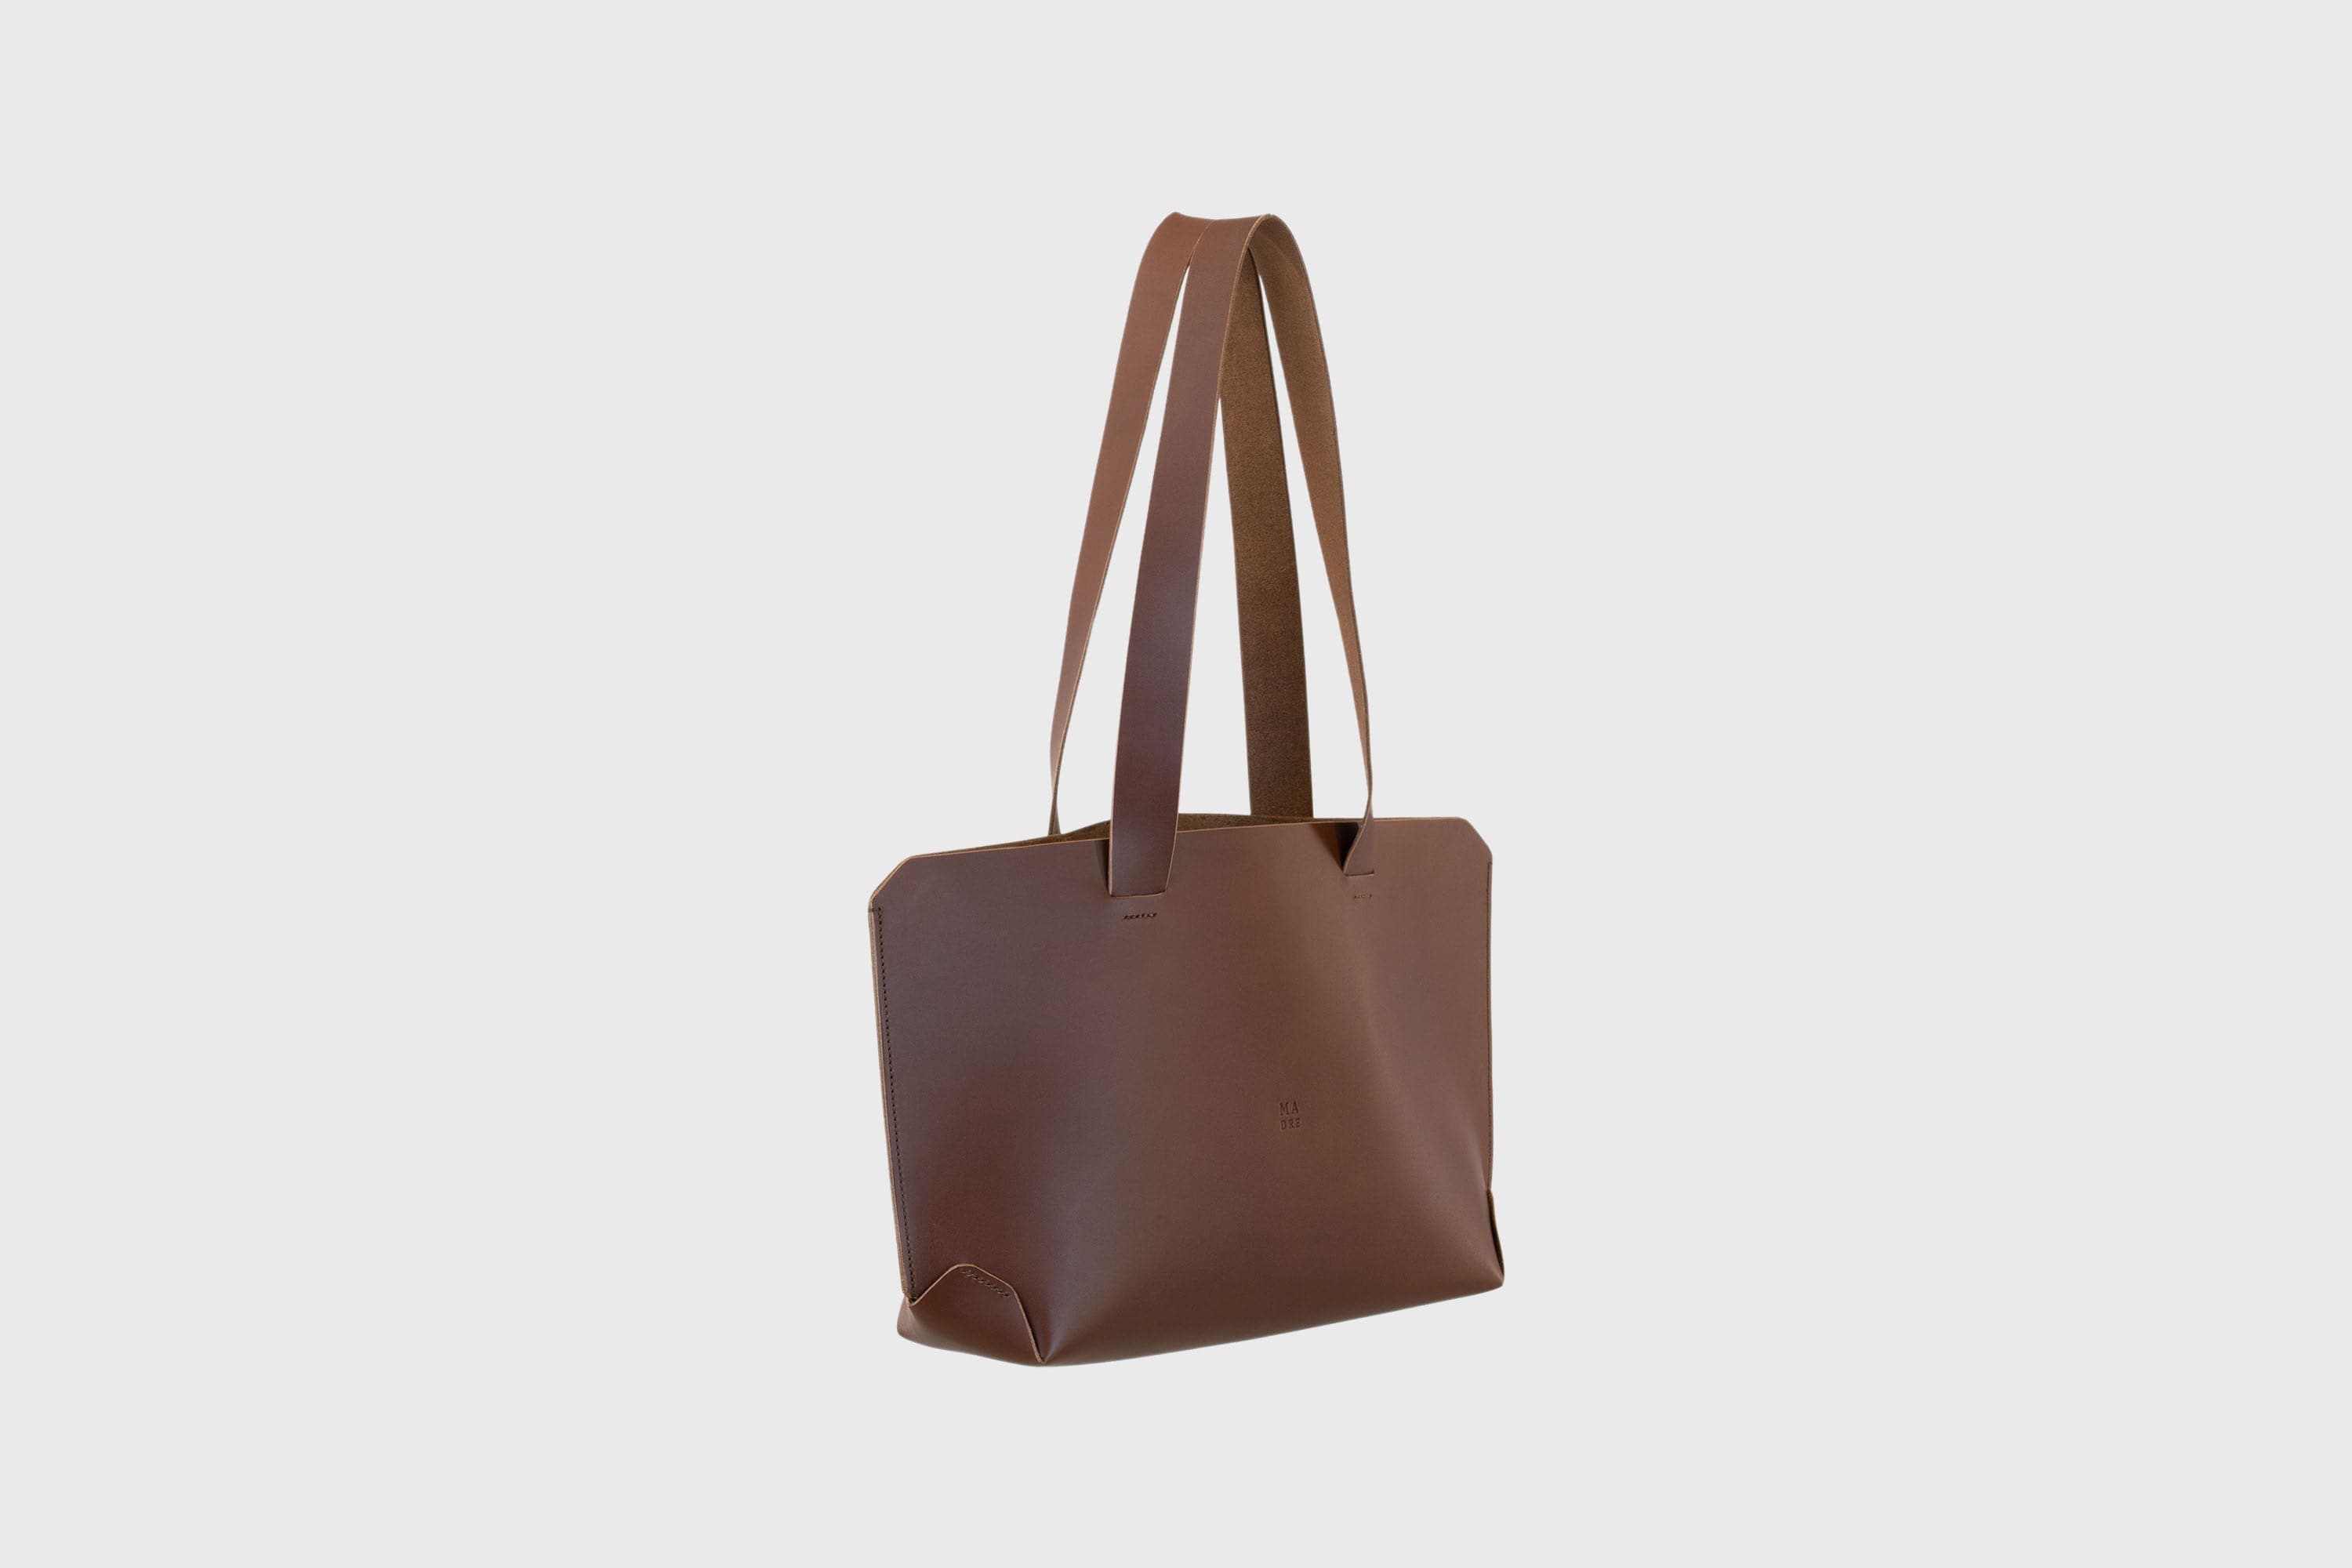 Tote Bag Chocolate Brown Vegetable Tanned Leather Diagonal View Minimalistic German Design By Manuel Dreesmann Atelier Madre Barcelona Spain